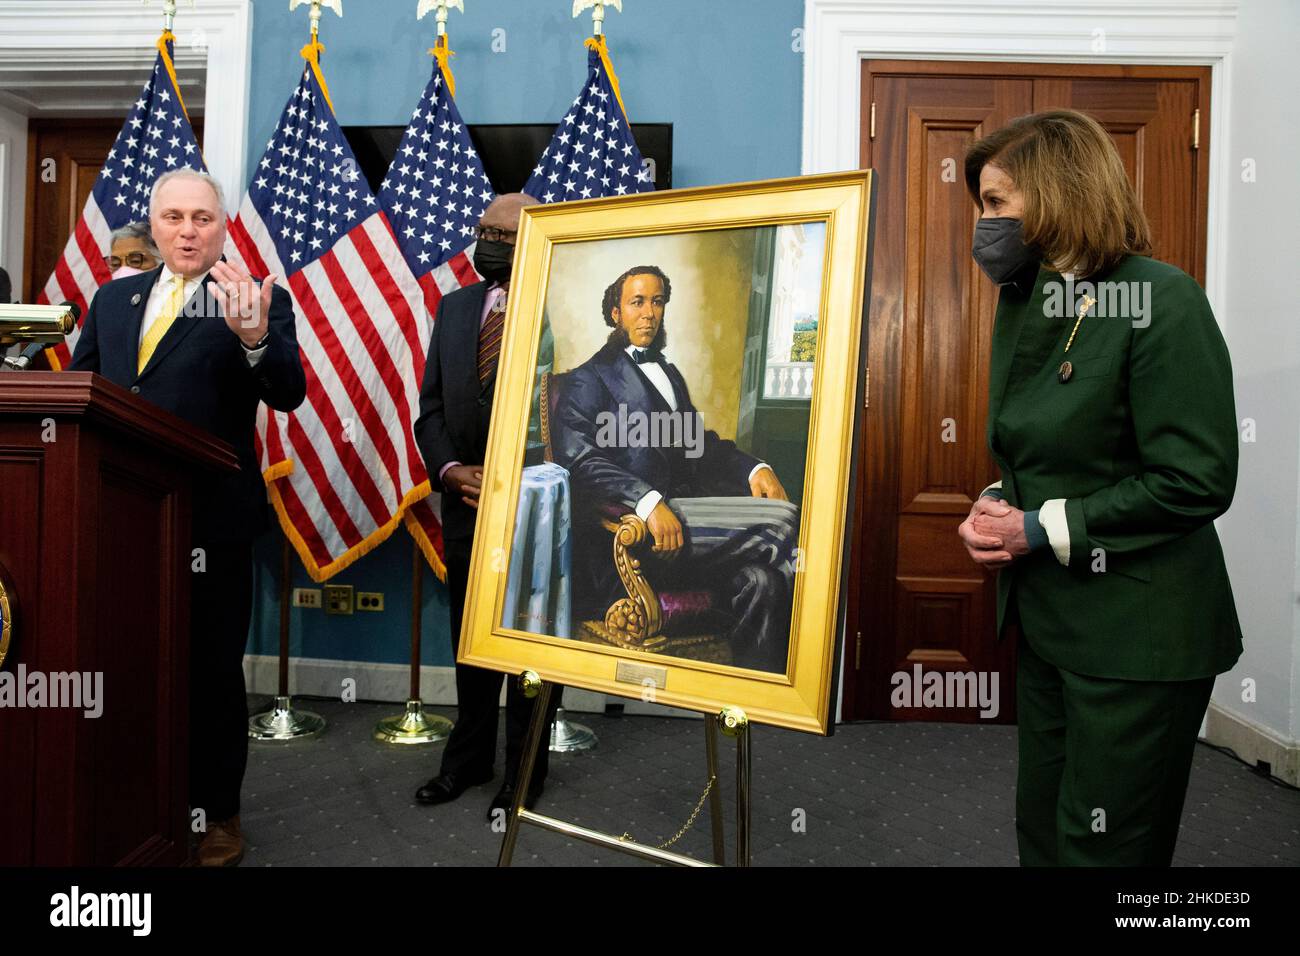 Washington, USA. 03rd Feb, 2022. United States Speaker of the House Nancy Pelosi (R) looks on as Republican Representative of Louisiana Steve Scalise (L) speaks beside a portrait of Joseph H. Rainey, during an unveiling ceremony for the Joseph H. Rainey Room, on Capitol Hill in Washington, DC, USA, 03 February 2022. Rainey was the first black person to serve in the United States House of Representatives. (Photo by Pool/Sipa USA) Credit: Sipa USA/Alamy Live News Stock Photo